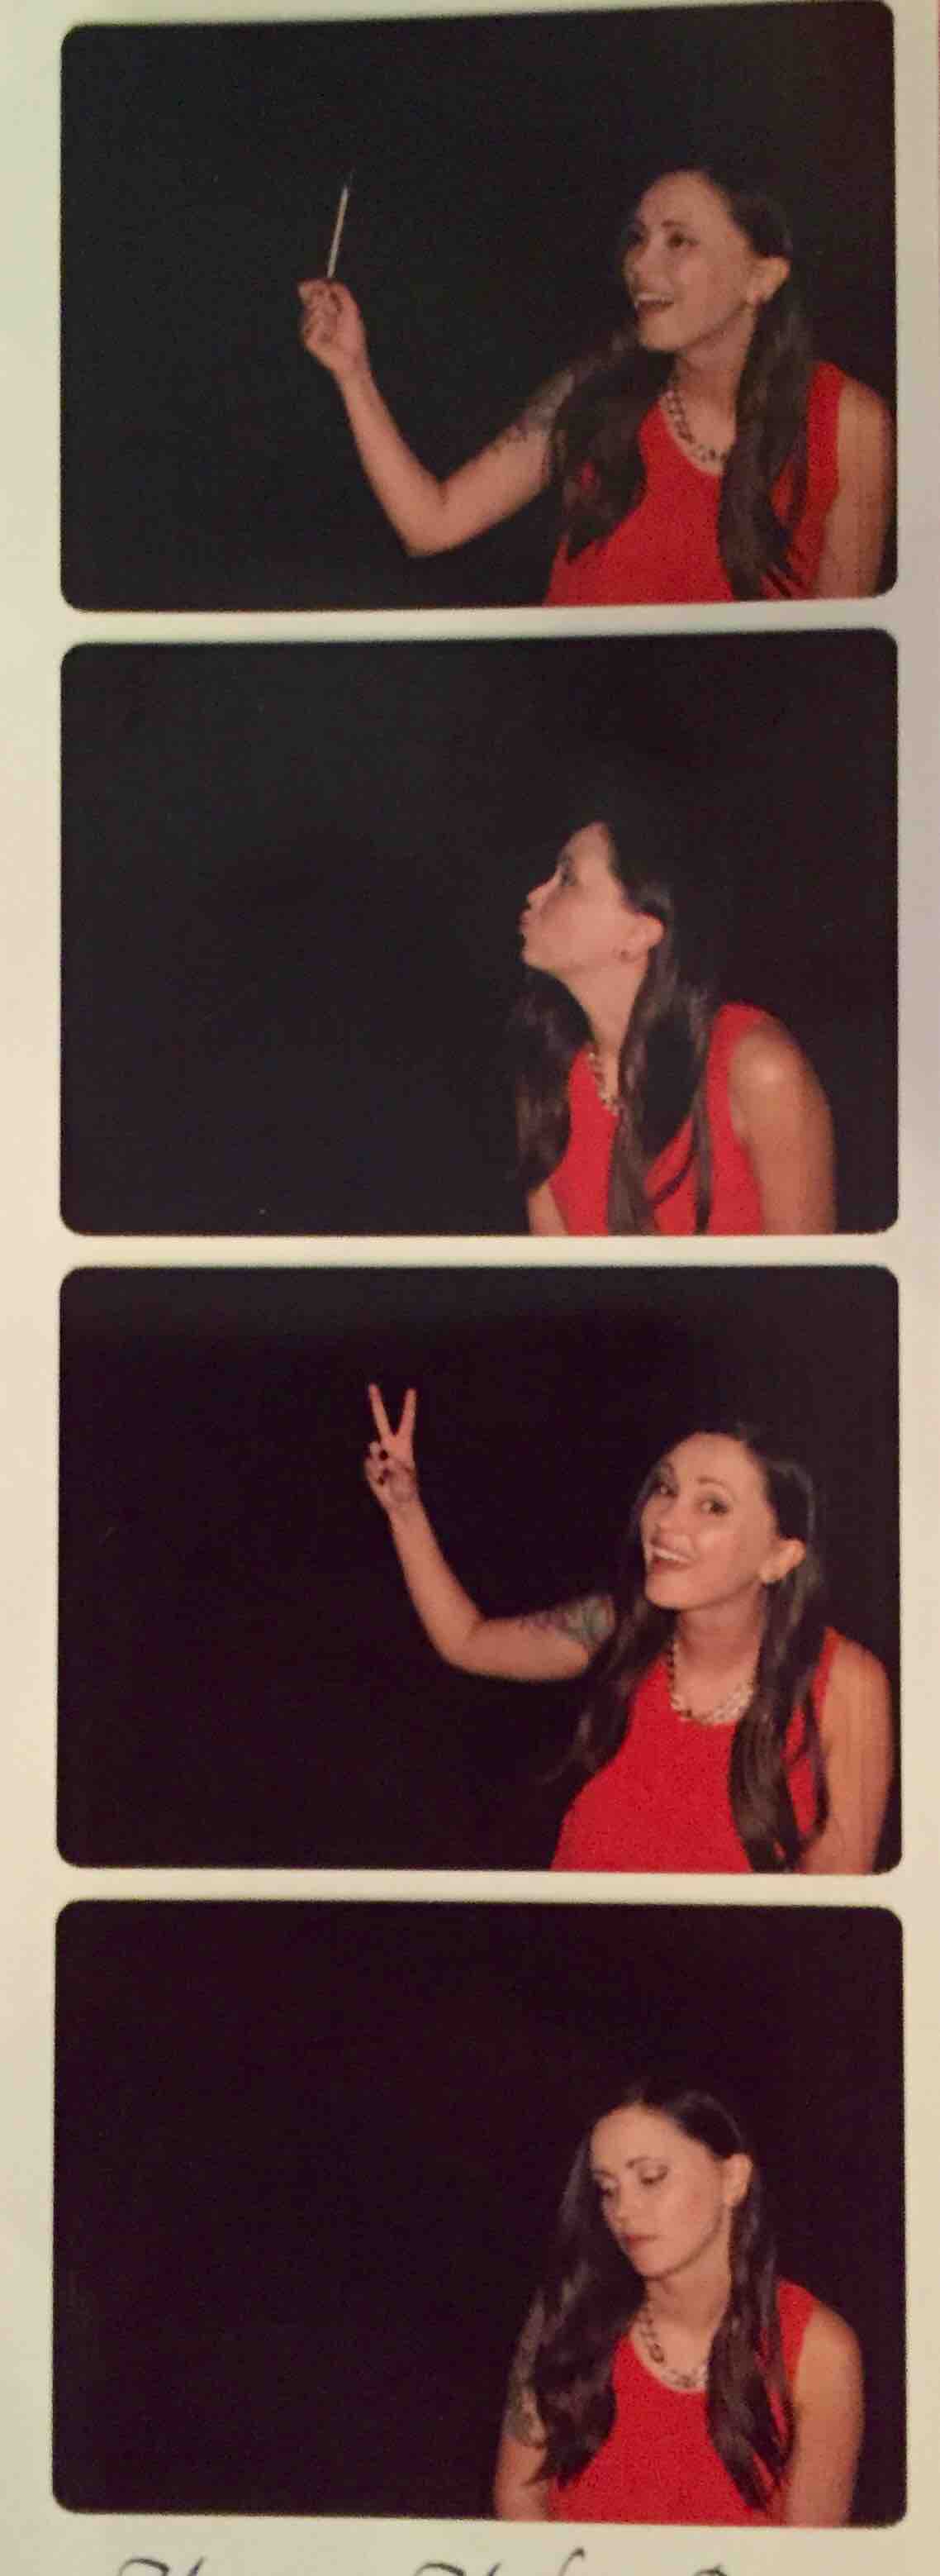 Sister went to a wedding reception, sent me this photo booth strip with the caption "forever alone"